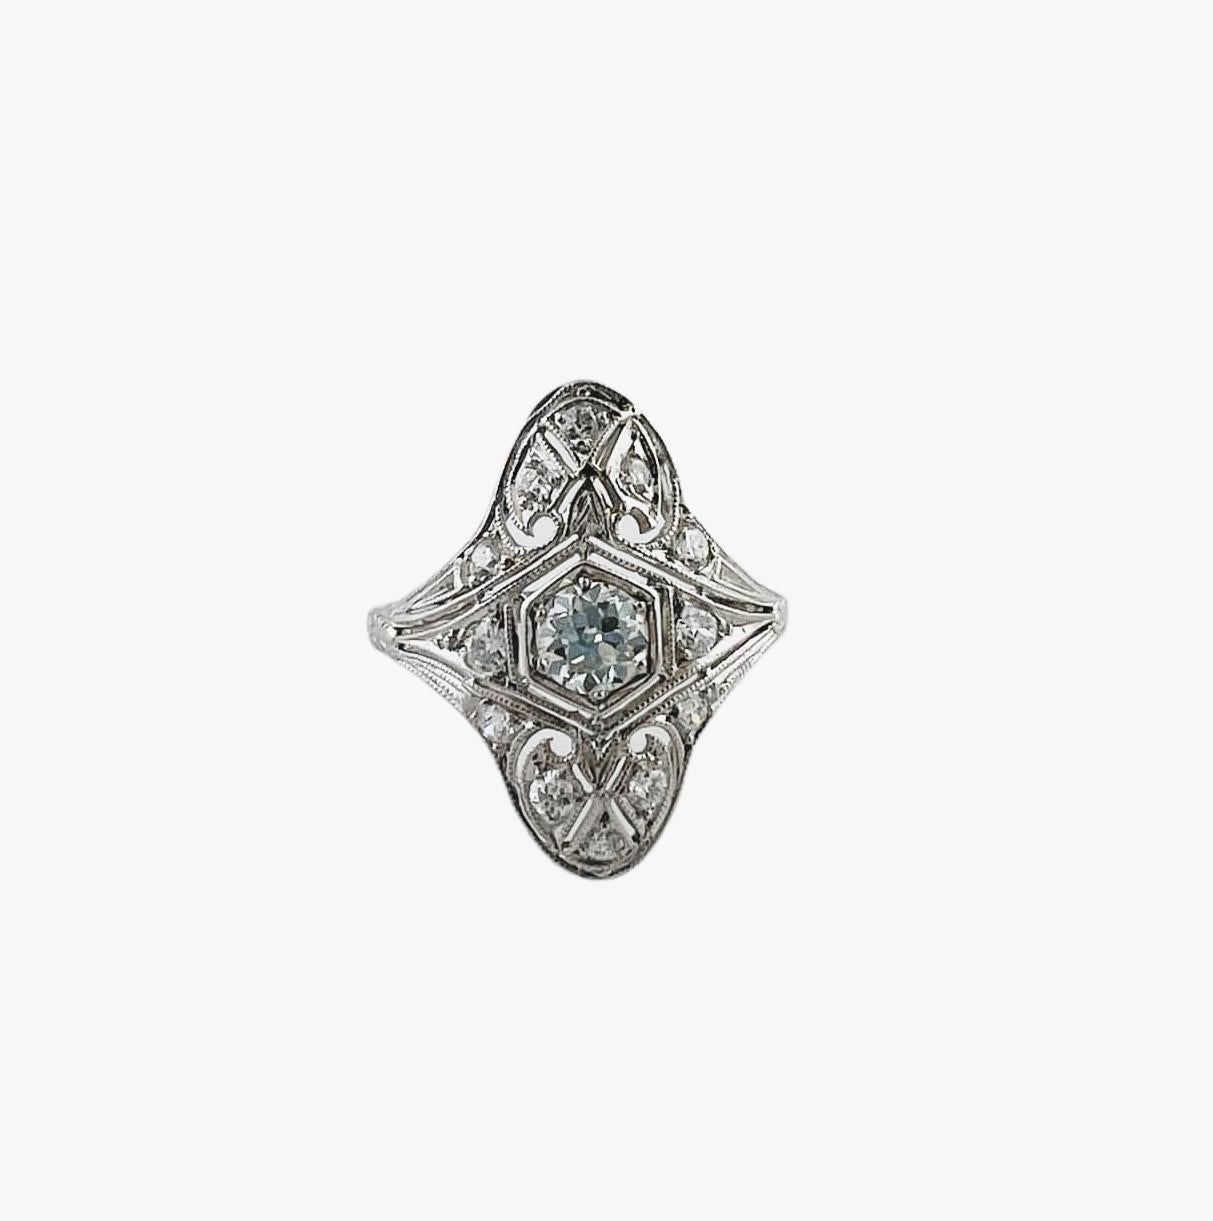 Antique Tiffany & Co. Diamond Art Deco Ring

This gorgeous diamond filigree ring by Tiffany & Co. is set in platinum.

Center transitional cut diamond (older round brilliant) is approx. .40cts

Surrounding transitional cut diamonds total approx. .30